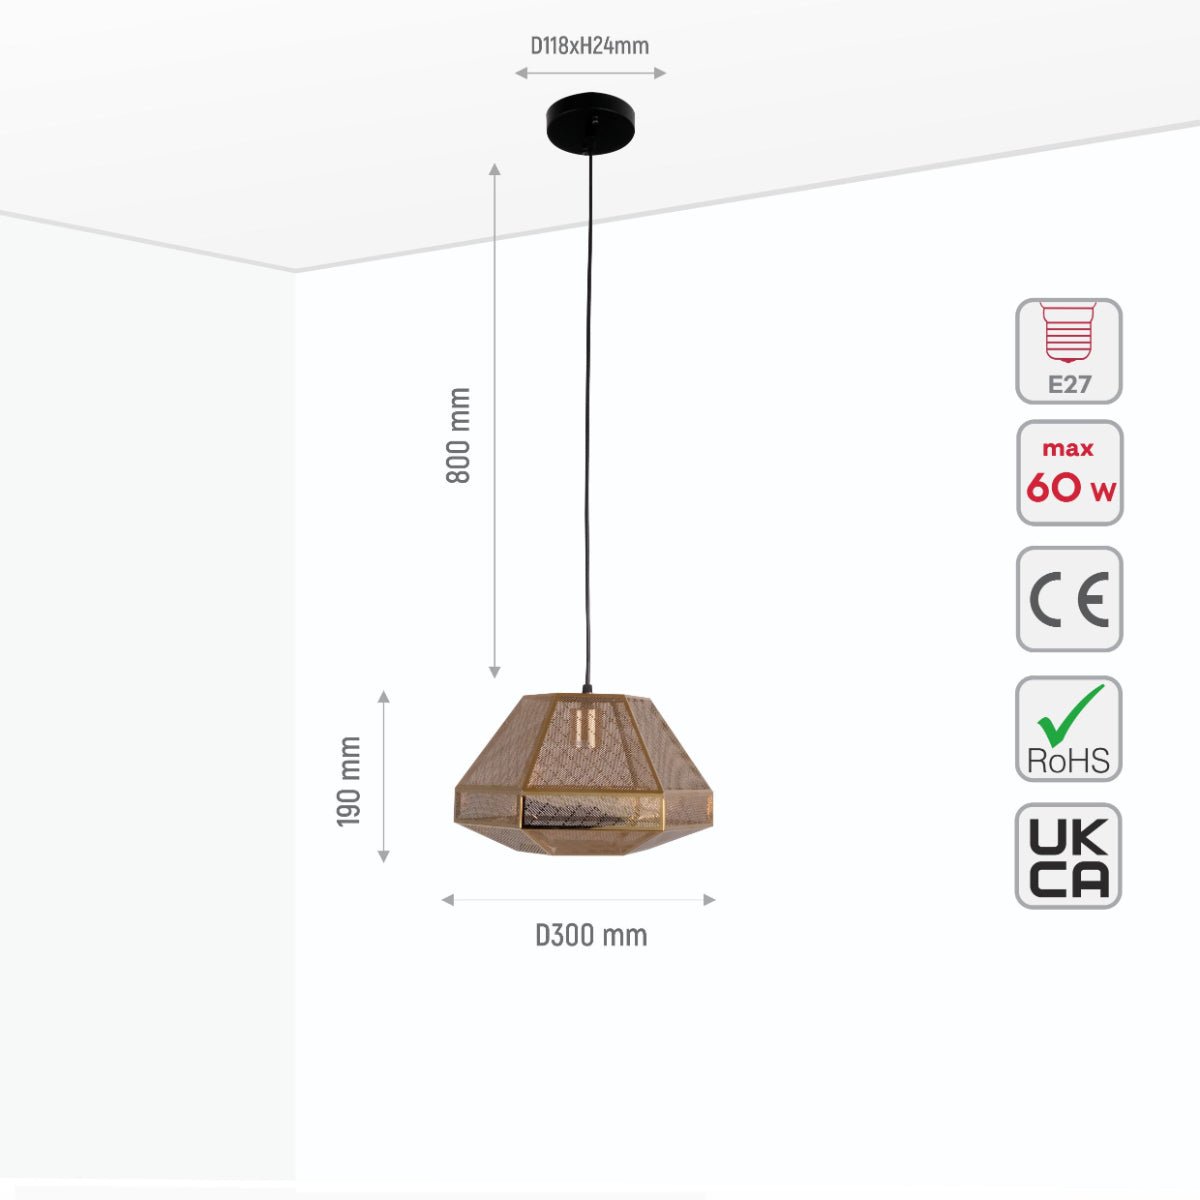 Size and specs of Golden Metal Polyhedral Pendant Ceiling Light Large with E27 | TEKLED 150-18122